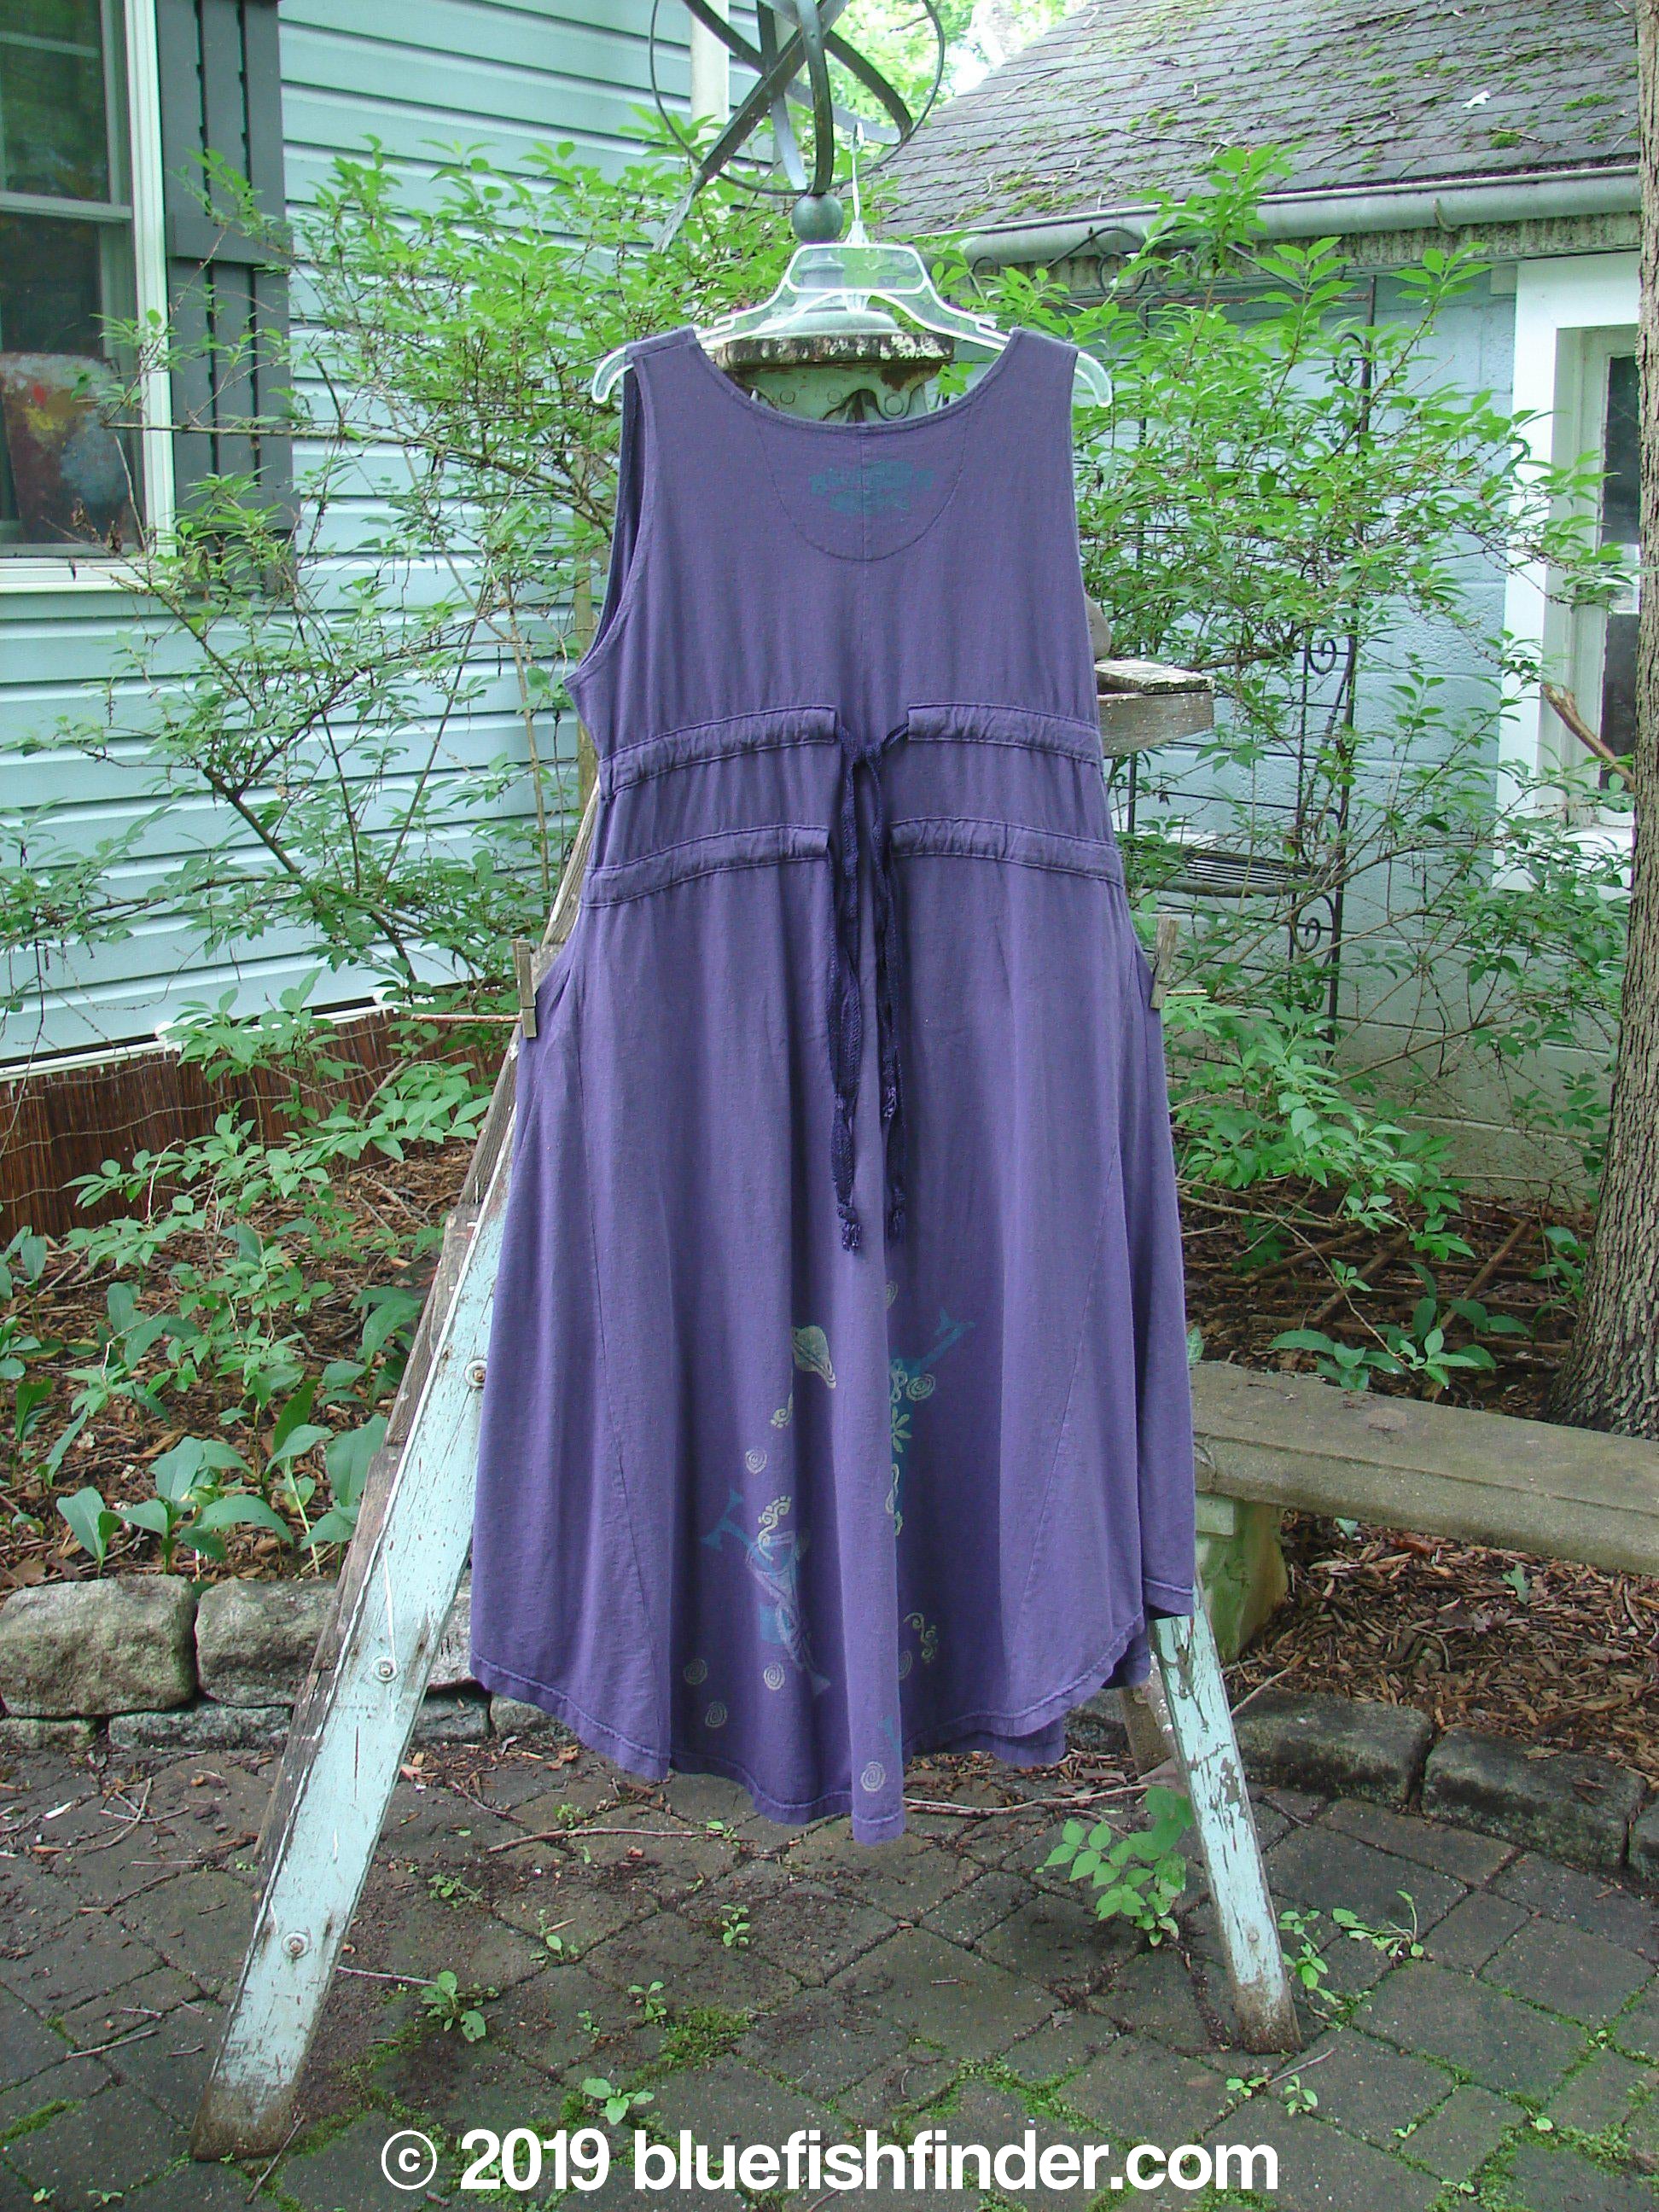 1994 Spin Jumper Mixed Purple Nuit Size 2: A medium weight cotton dress with empire waist, tie tunnels, V neckline, and sweeping hemline. Features nature, chair, and letter theme with leaves and vines. Bust 50, waist 50, hips 60. Lengths: side 51, front/back 58. Hem circumference 110 inches.